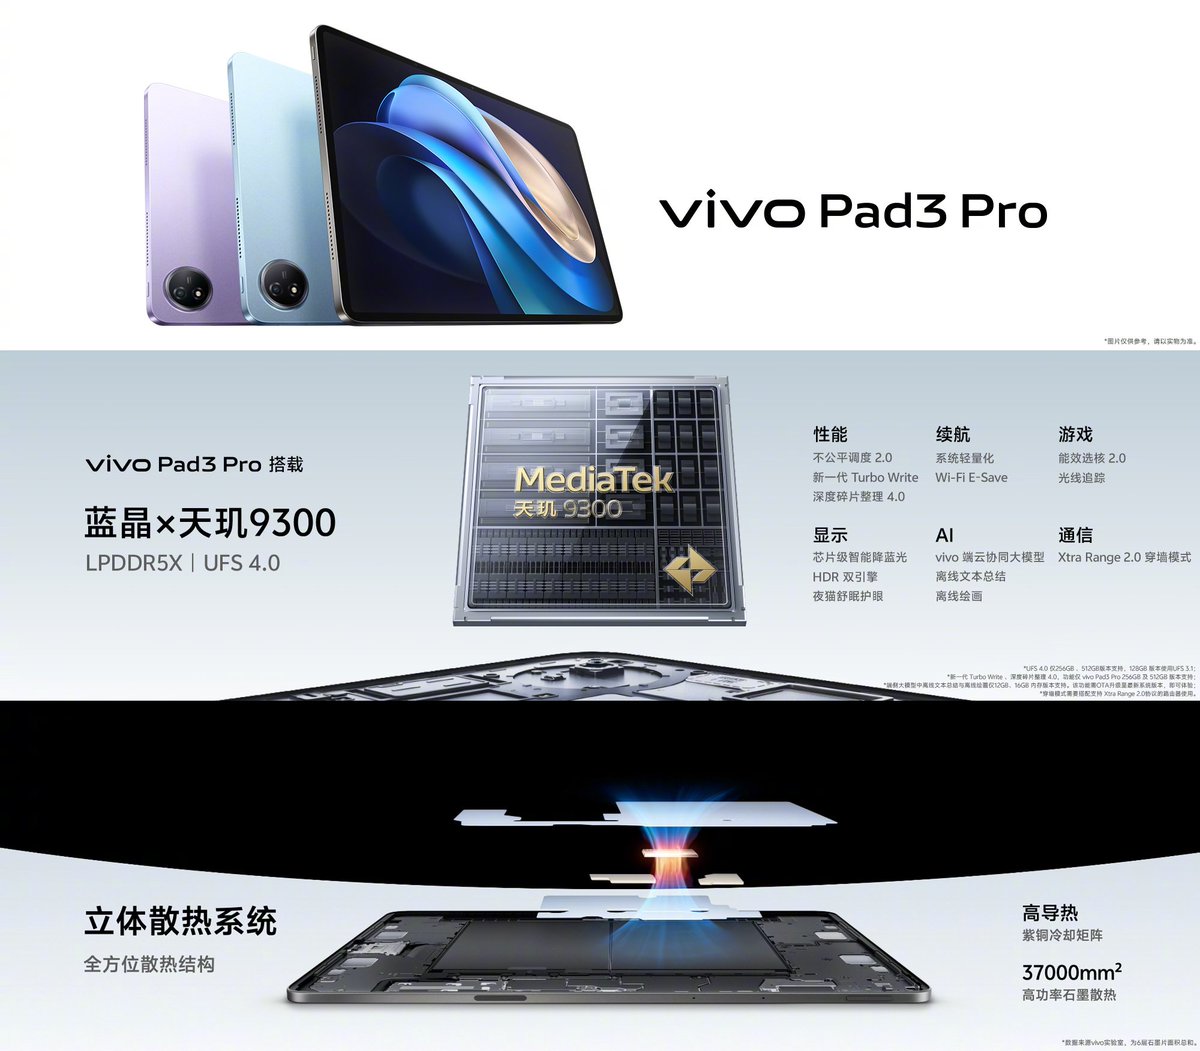 vivo Pad 3 Pro launched in China.
Starting price: Yuan 2999
- 13 inch, 3.1K resolution, 144Hz refresh rate, 16:10 aspect ratio, LTPS display with DCI-P3 100% color gamut
-MediaTek Dimensity 9300 
- 8GB, 12GB, 16GB RAM
- 128GB, 256GB, 512GB storage
- 11500mAh/80W
- 13MP rear